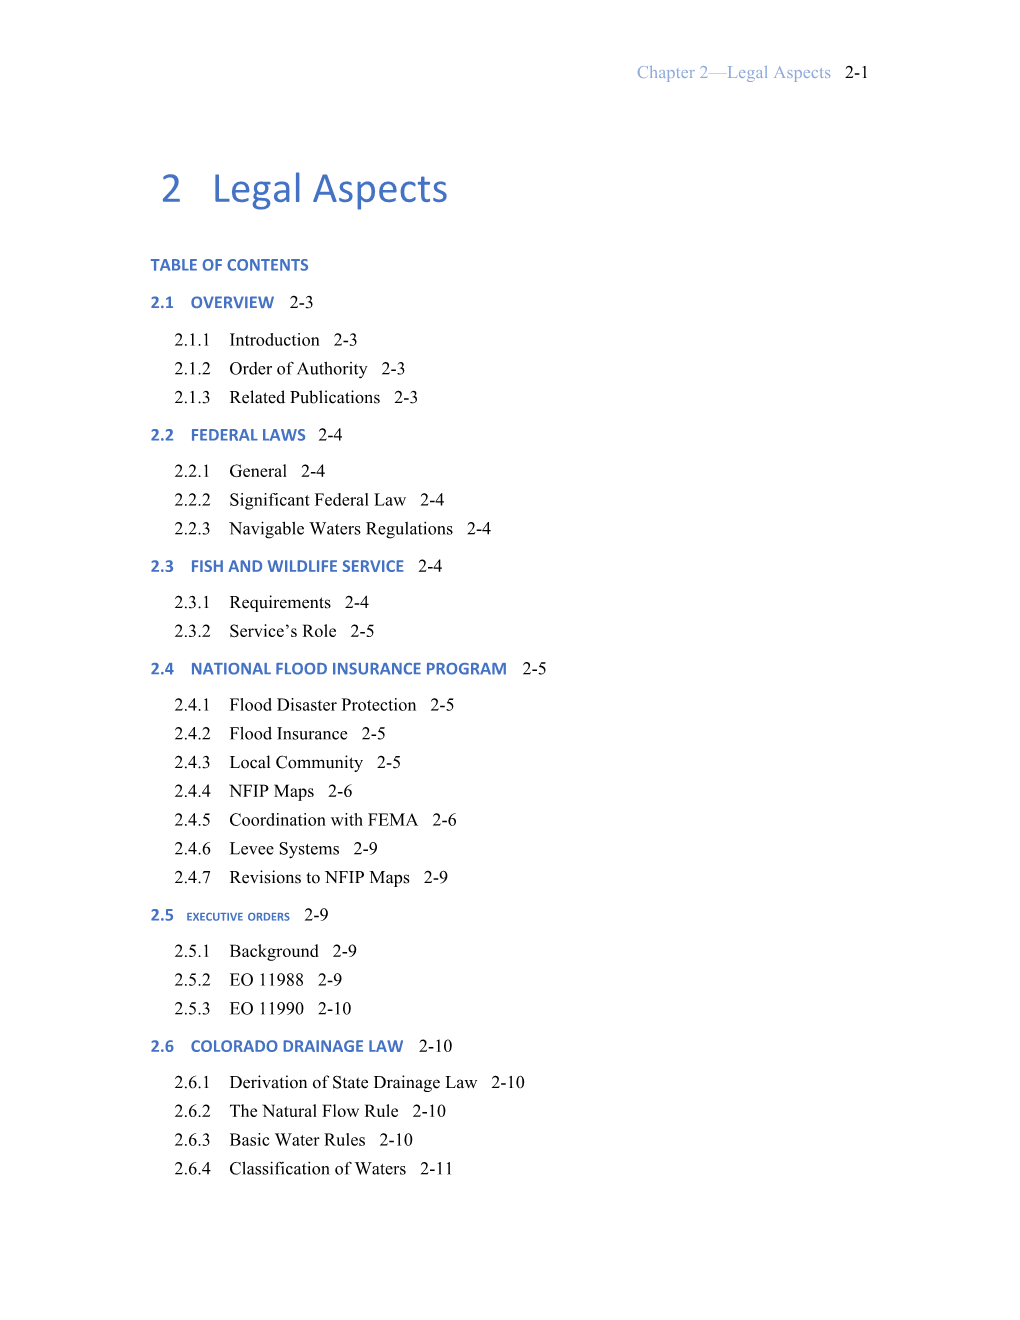 Chapter 2—Legal Aspects 2-1 ​